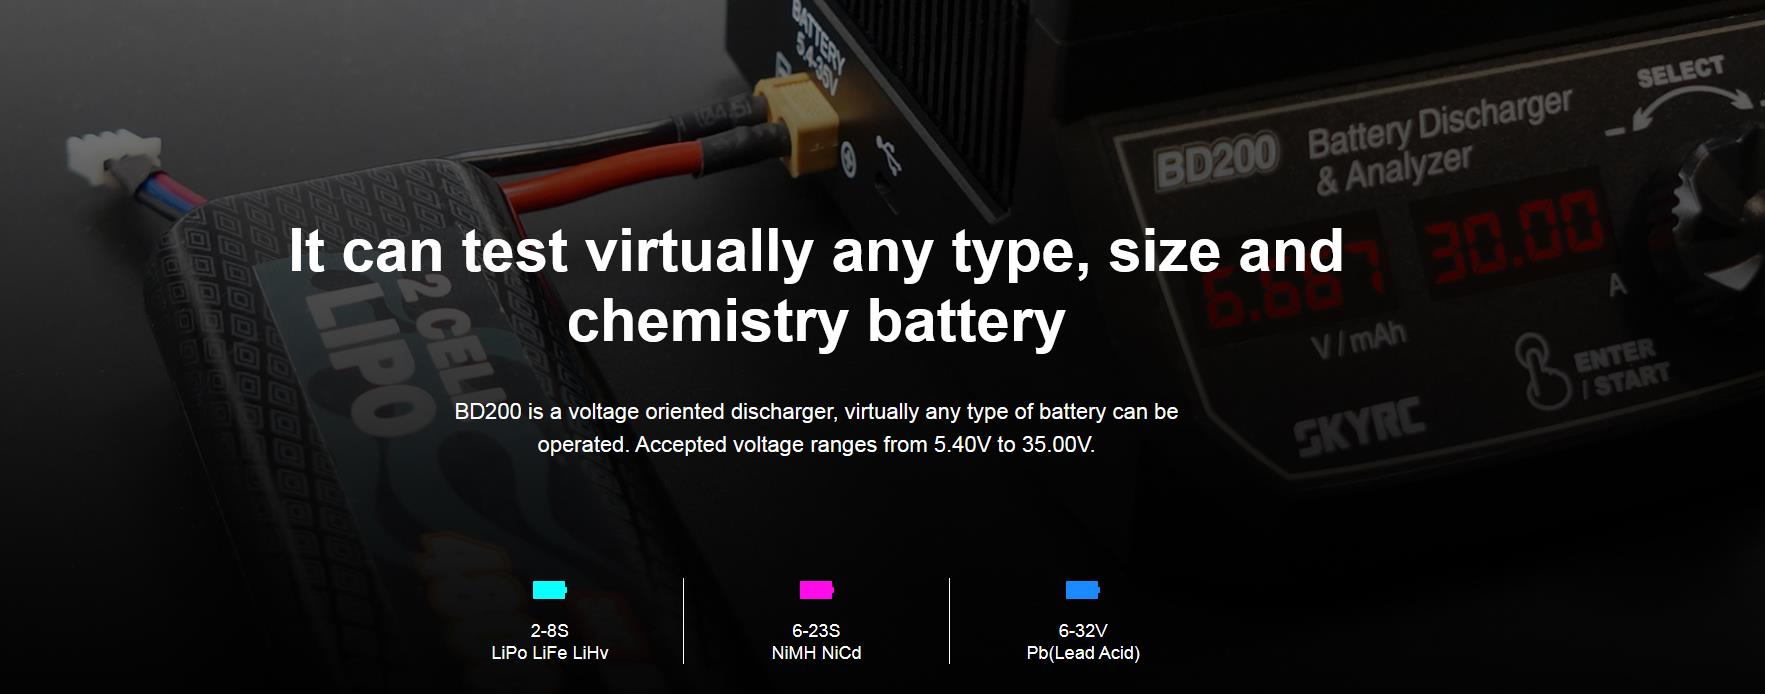 SkyRC BD200 200W 30A Battery Discharger & Analyzer For LiPo LiFe LiHV NiCd NiMH Pb Battery